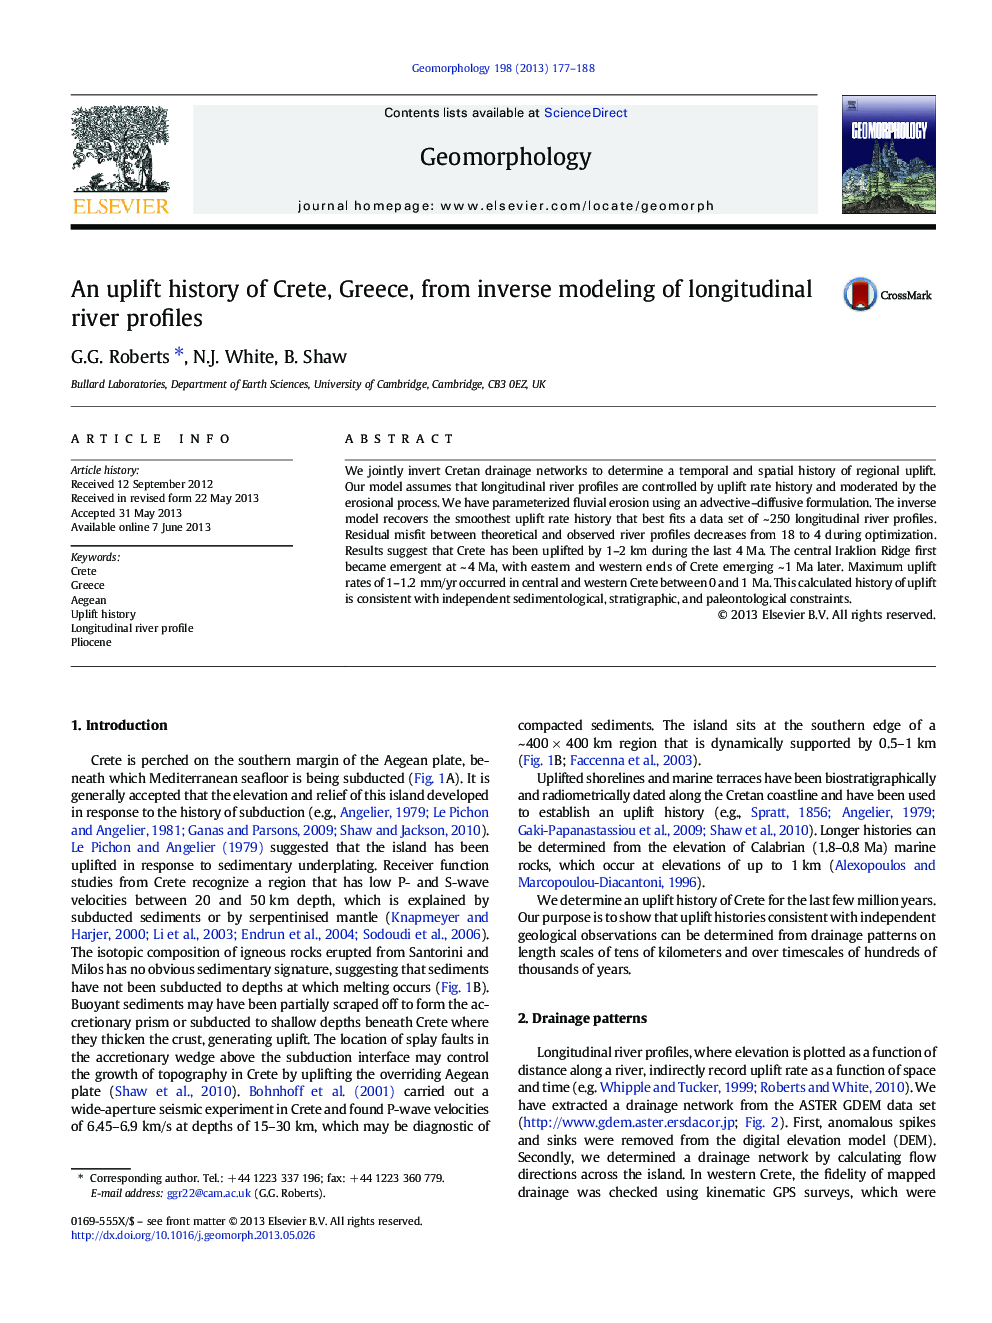 An uplift history of Crete, Greece, from inverse modeling of longitudinal river profiles